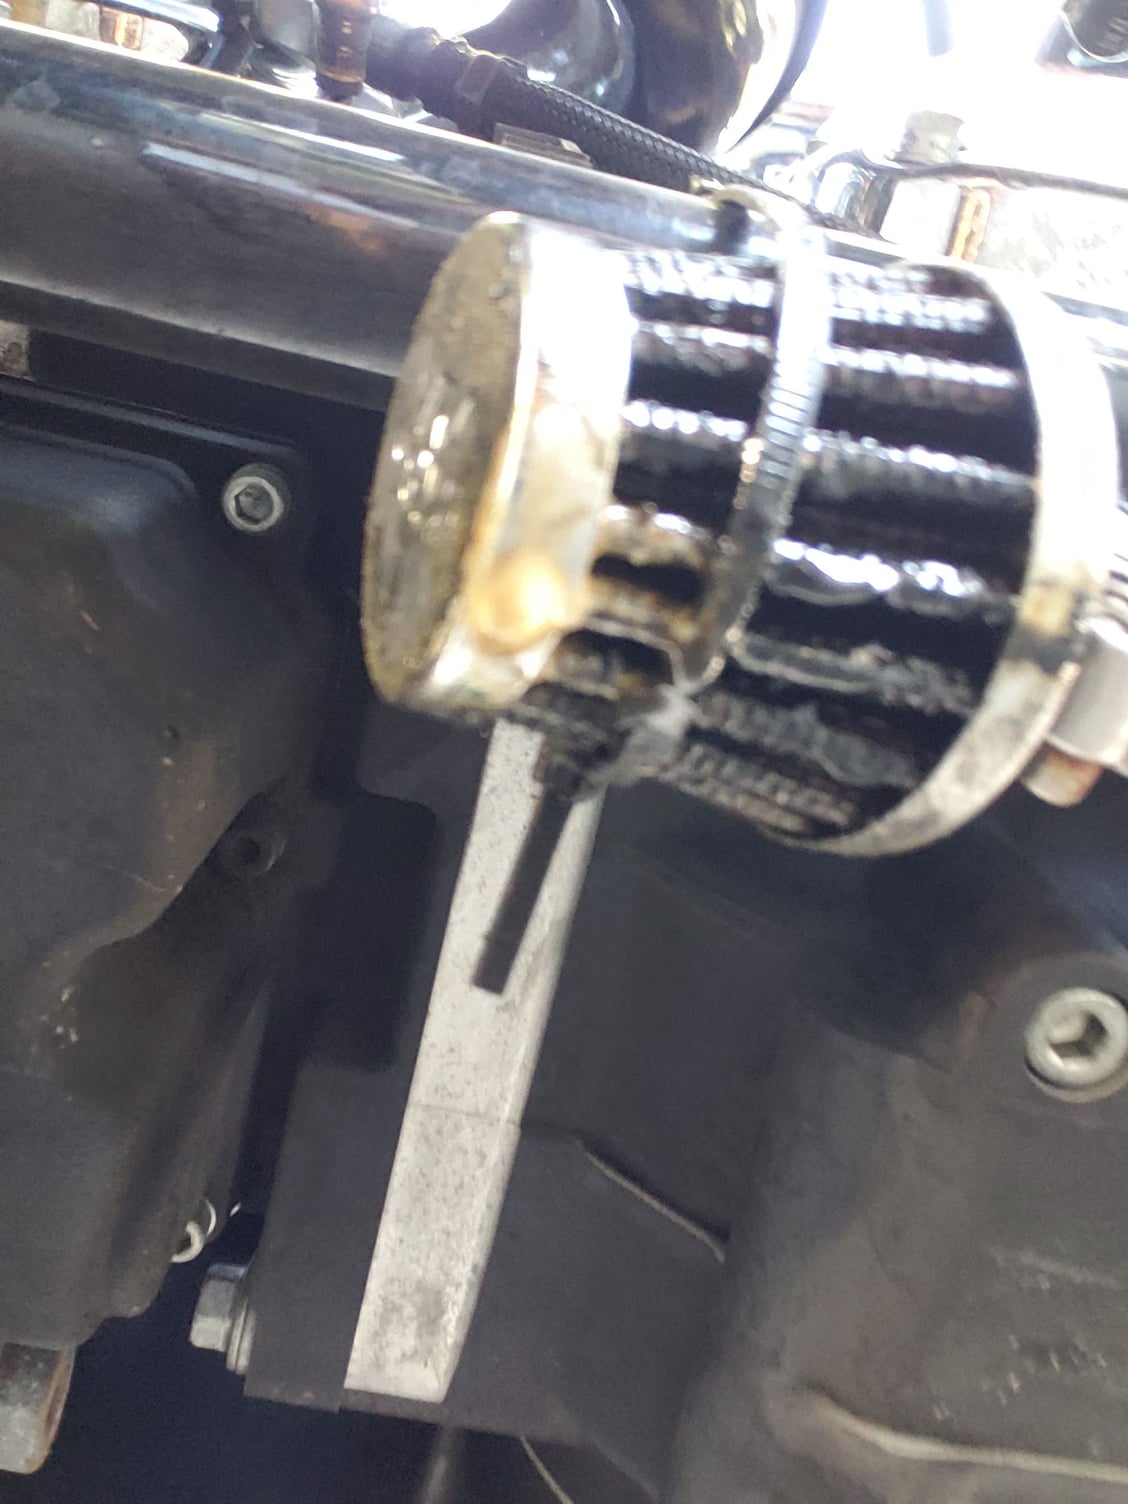 Cream colored fluid from external breather - Harley Davidson Forums